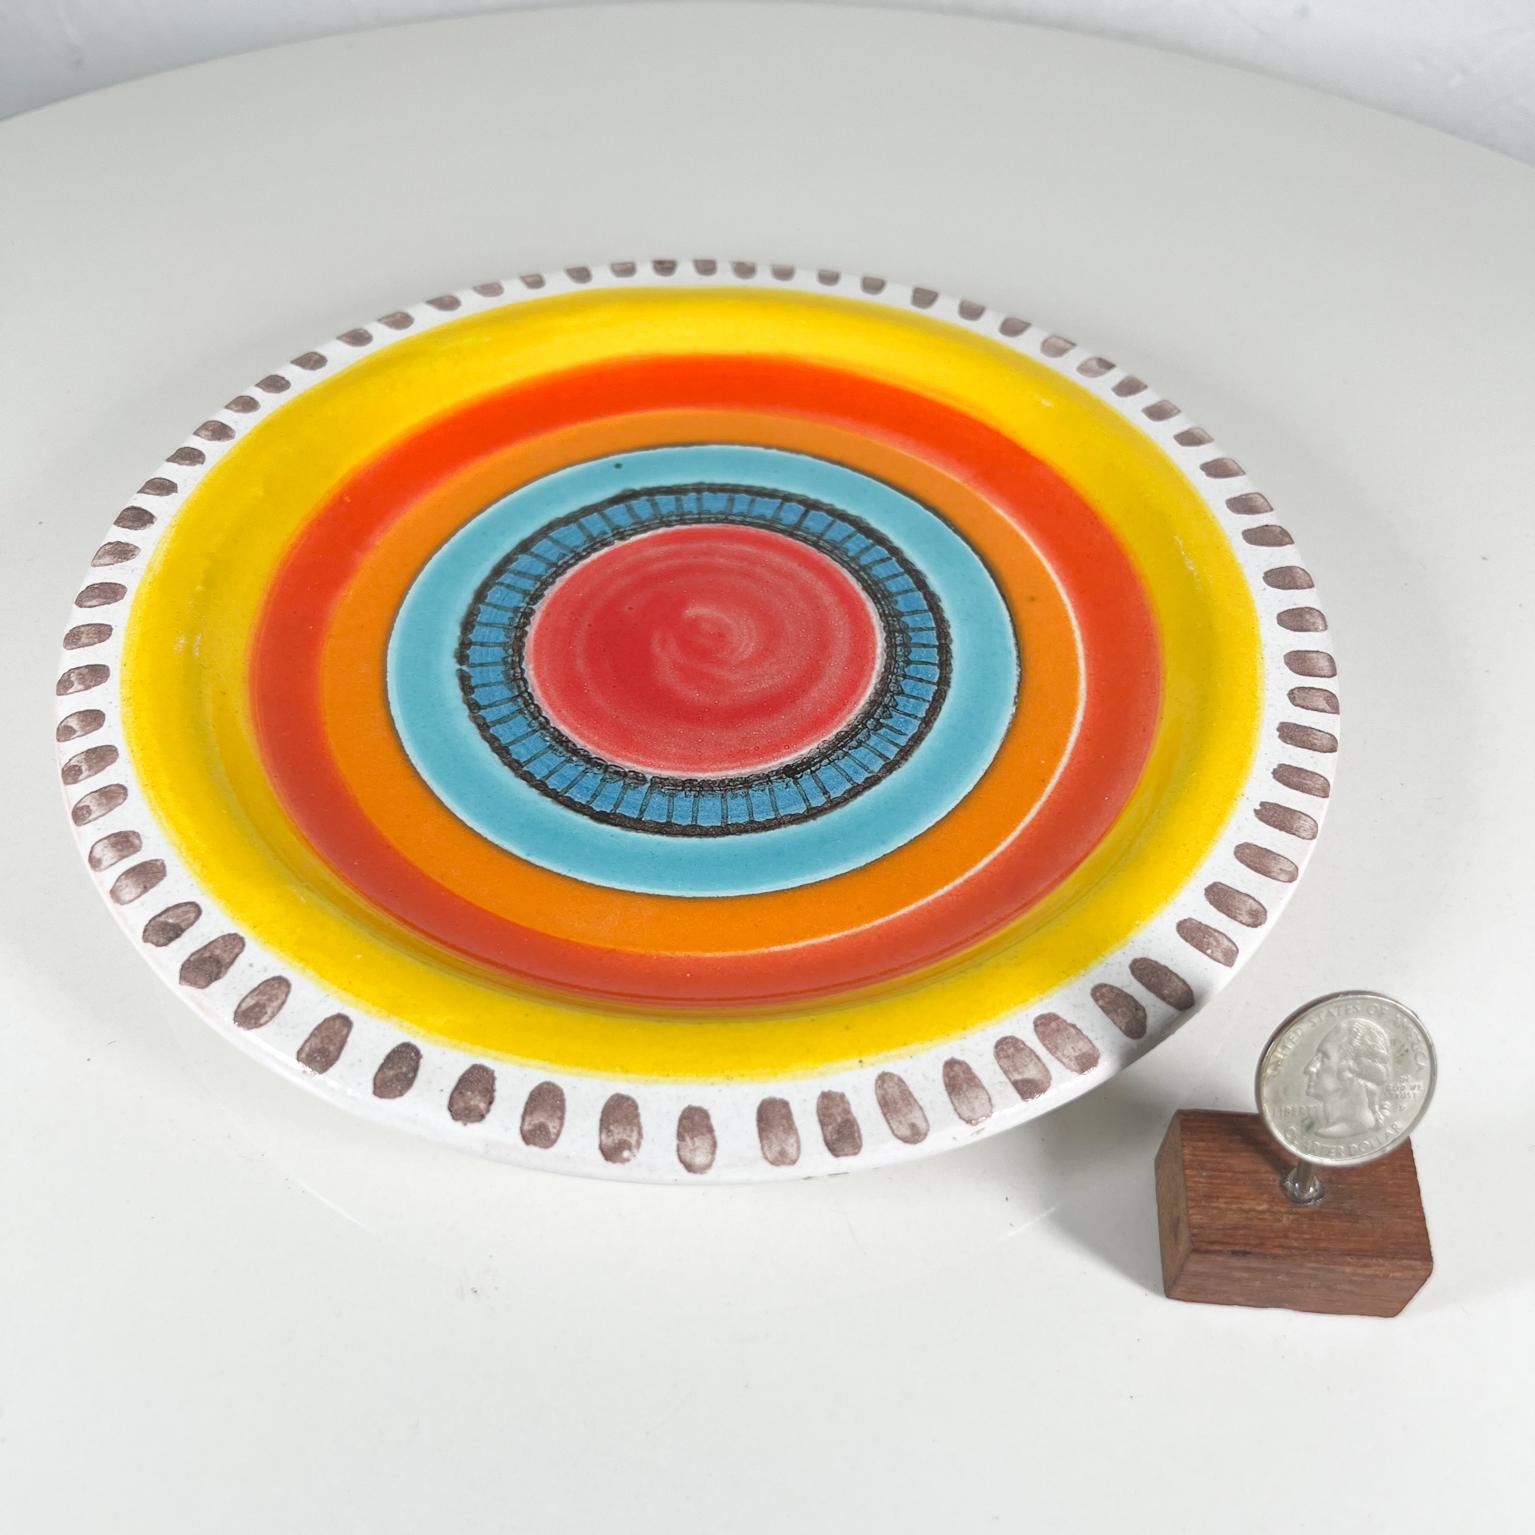 1960s DeSimone Pottery of Italy Vibrant Ceramic Art Plate Hand Painted 
Giovanni Desimone Italy
8.63 diameter x 1 tall
Inscription on the back: Desimone ITALY 9 A C
Original vintage condition.
Refer to images.
We have more!